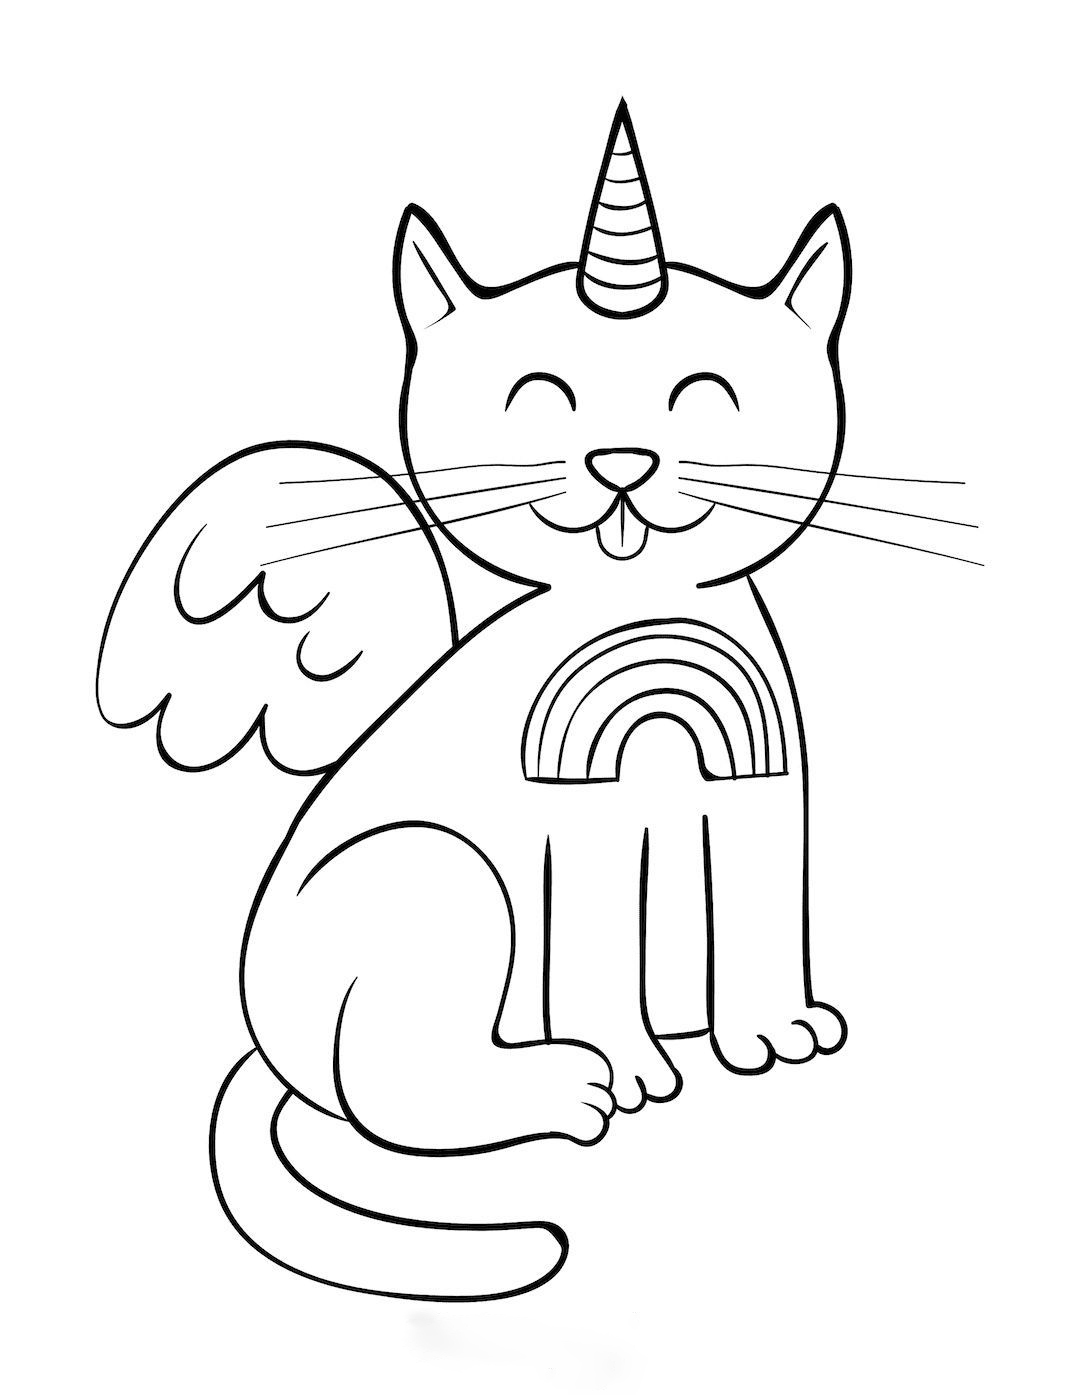 free printable coloring pages unicorn